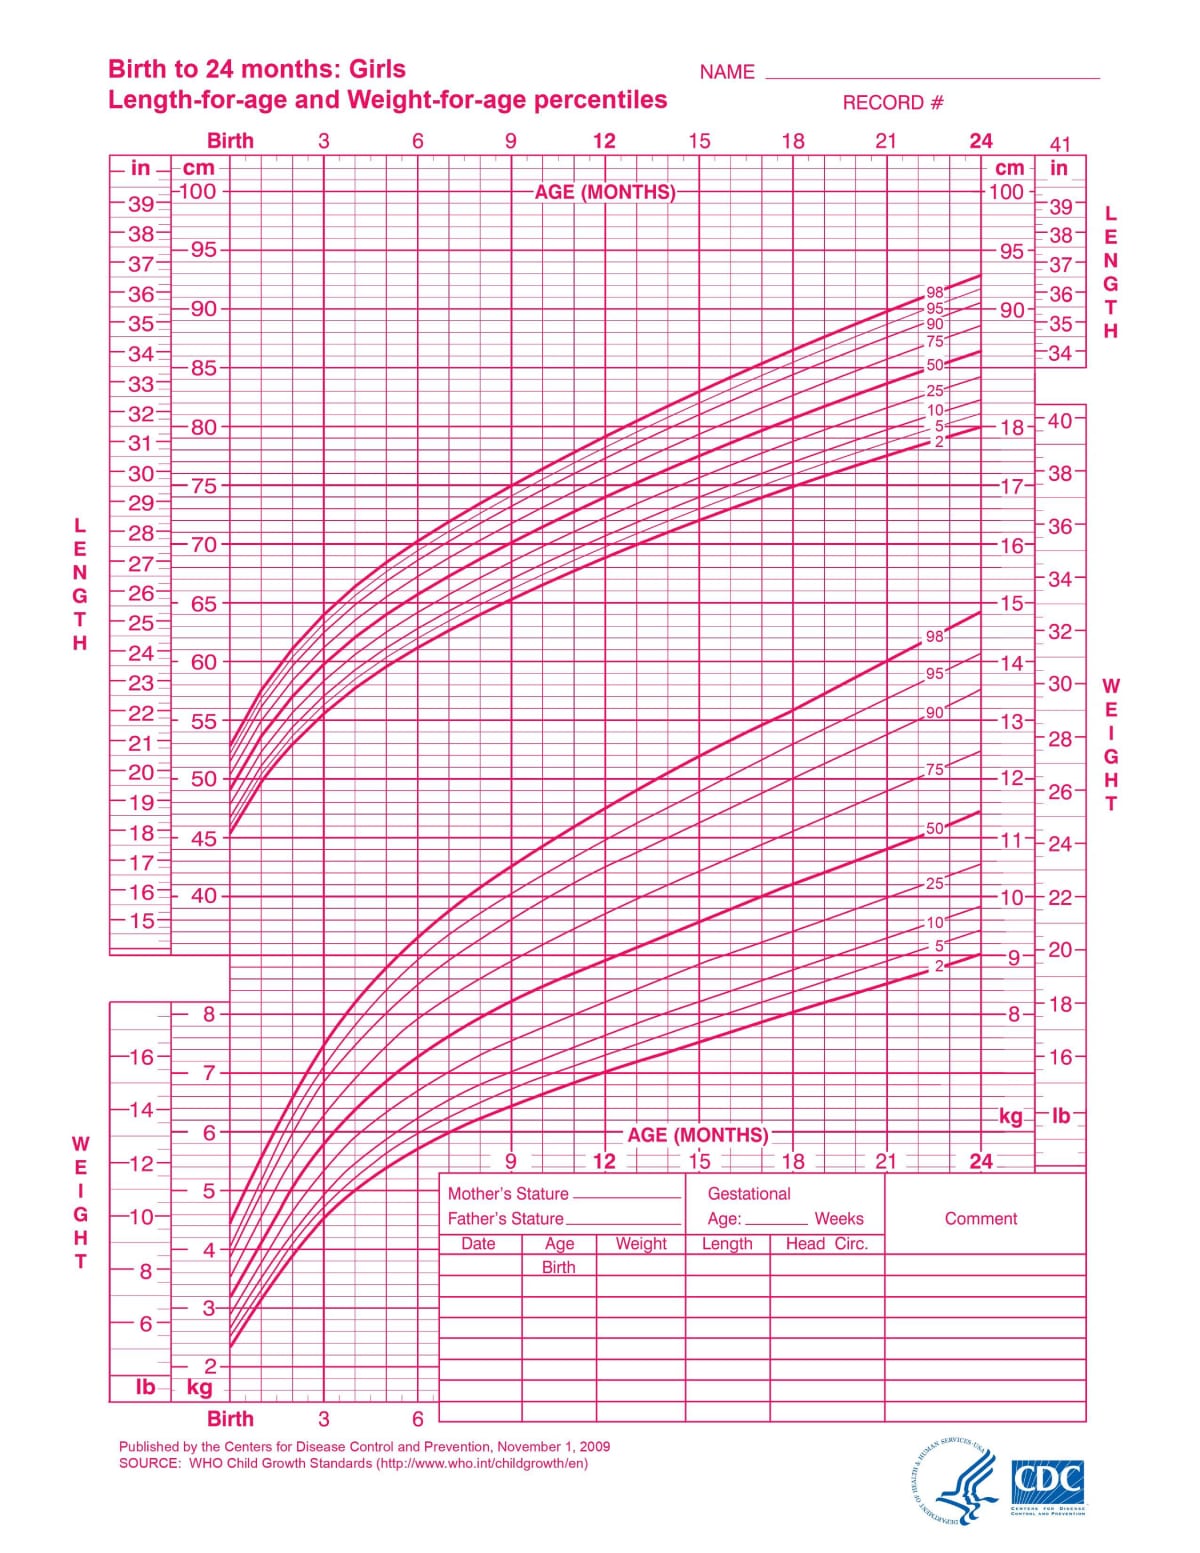 A line graph with curves showing length-for-age and weight-for-age percentiles for infant girls ages birth to 24 months. The graph was published by the Centers for Disease Control and Prevention on November 1, 2009. Source: WHO Child Growth Standards.